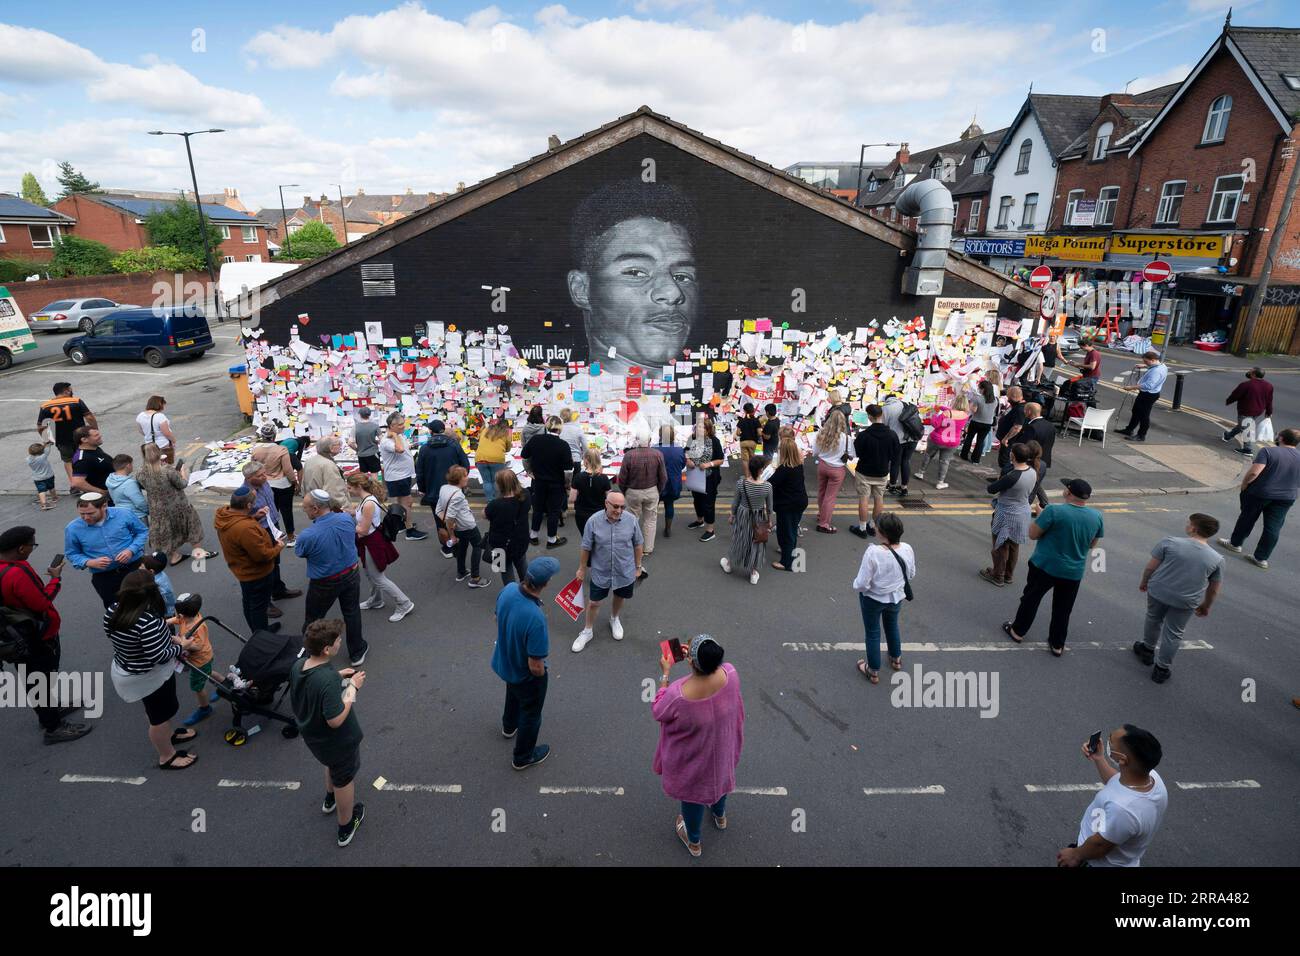 210715 -- MANCHESTER, July 15, 2021 -- People are seen by a mural honouring footballer Marcus Rashford which is covered with positive messages after having been vandalised with graffiti following England s defeat to Italy in the Euro 2020 final, in Manchester, Britain, on July 14, 2021. The artwork in the Withington in South Manchester was defaced shortly after England lost in a penalty shootout on Sunday but subsequently covered with messages of support by well wishers. Photo by Jon Super/Xinhua SP BRITAIN-MANCHESTER-FOOTBALL-MURAL-MARCUS RASHFORD HanxYan PUBLICATIONxNOTxINxCHN Stock Photo